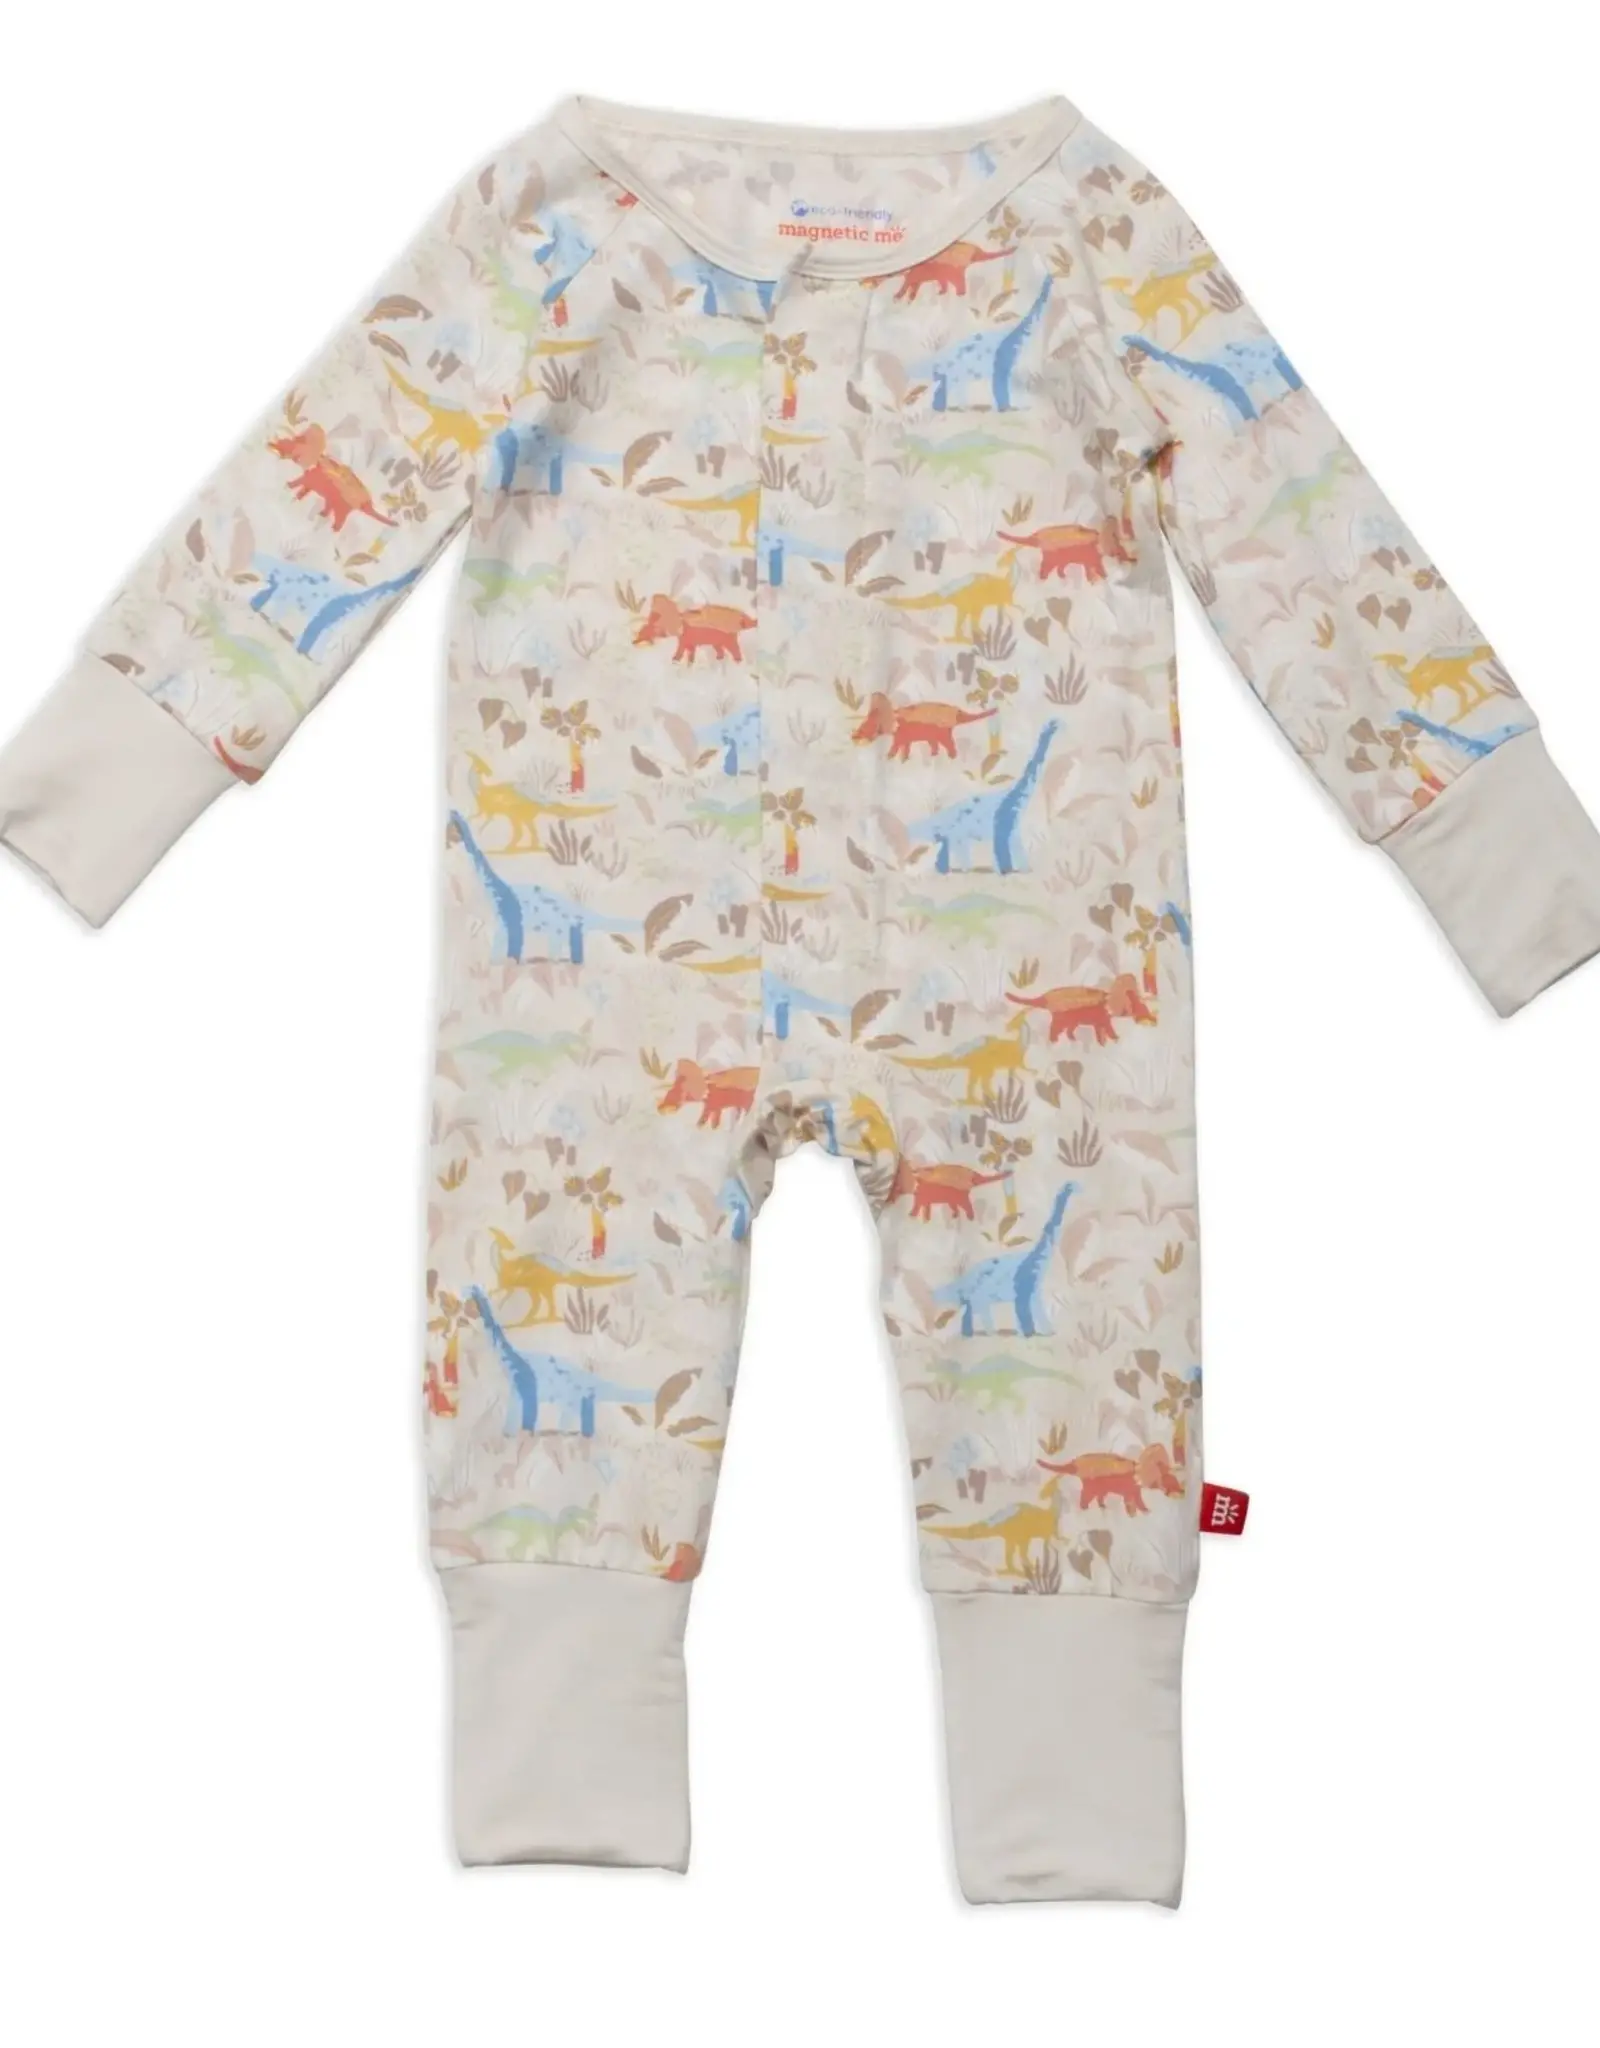 Magnetic Me 6-9MO: EXT Roar Dinary Grow With Me Coverall